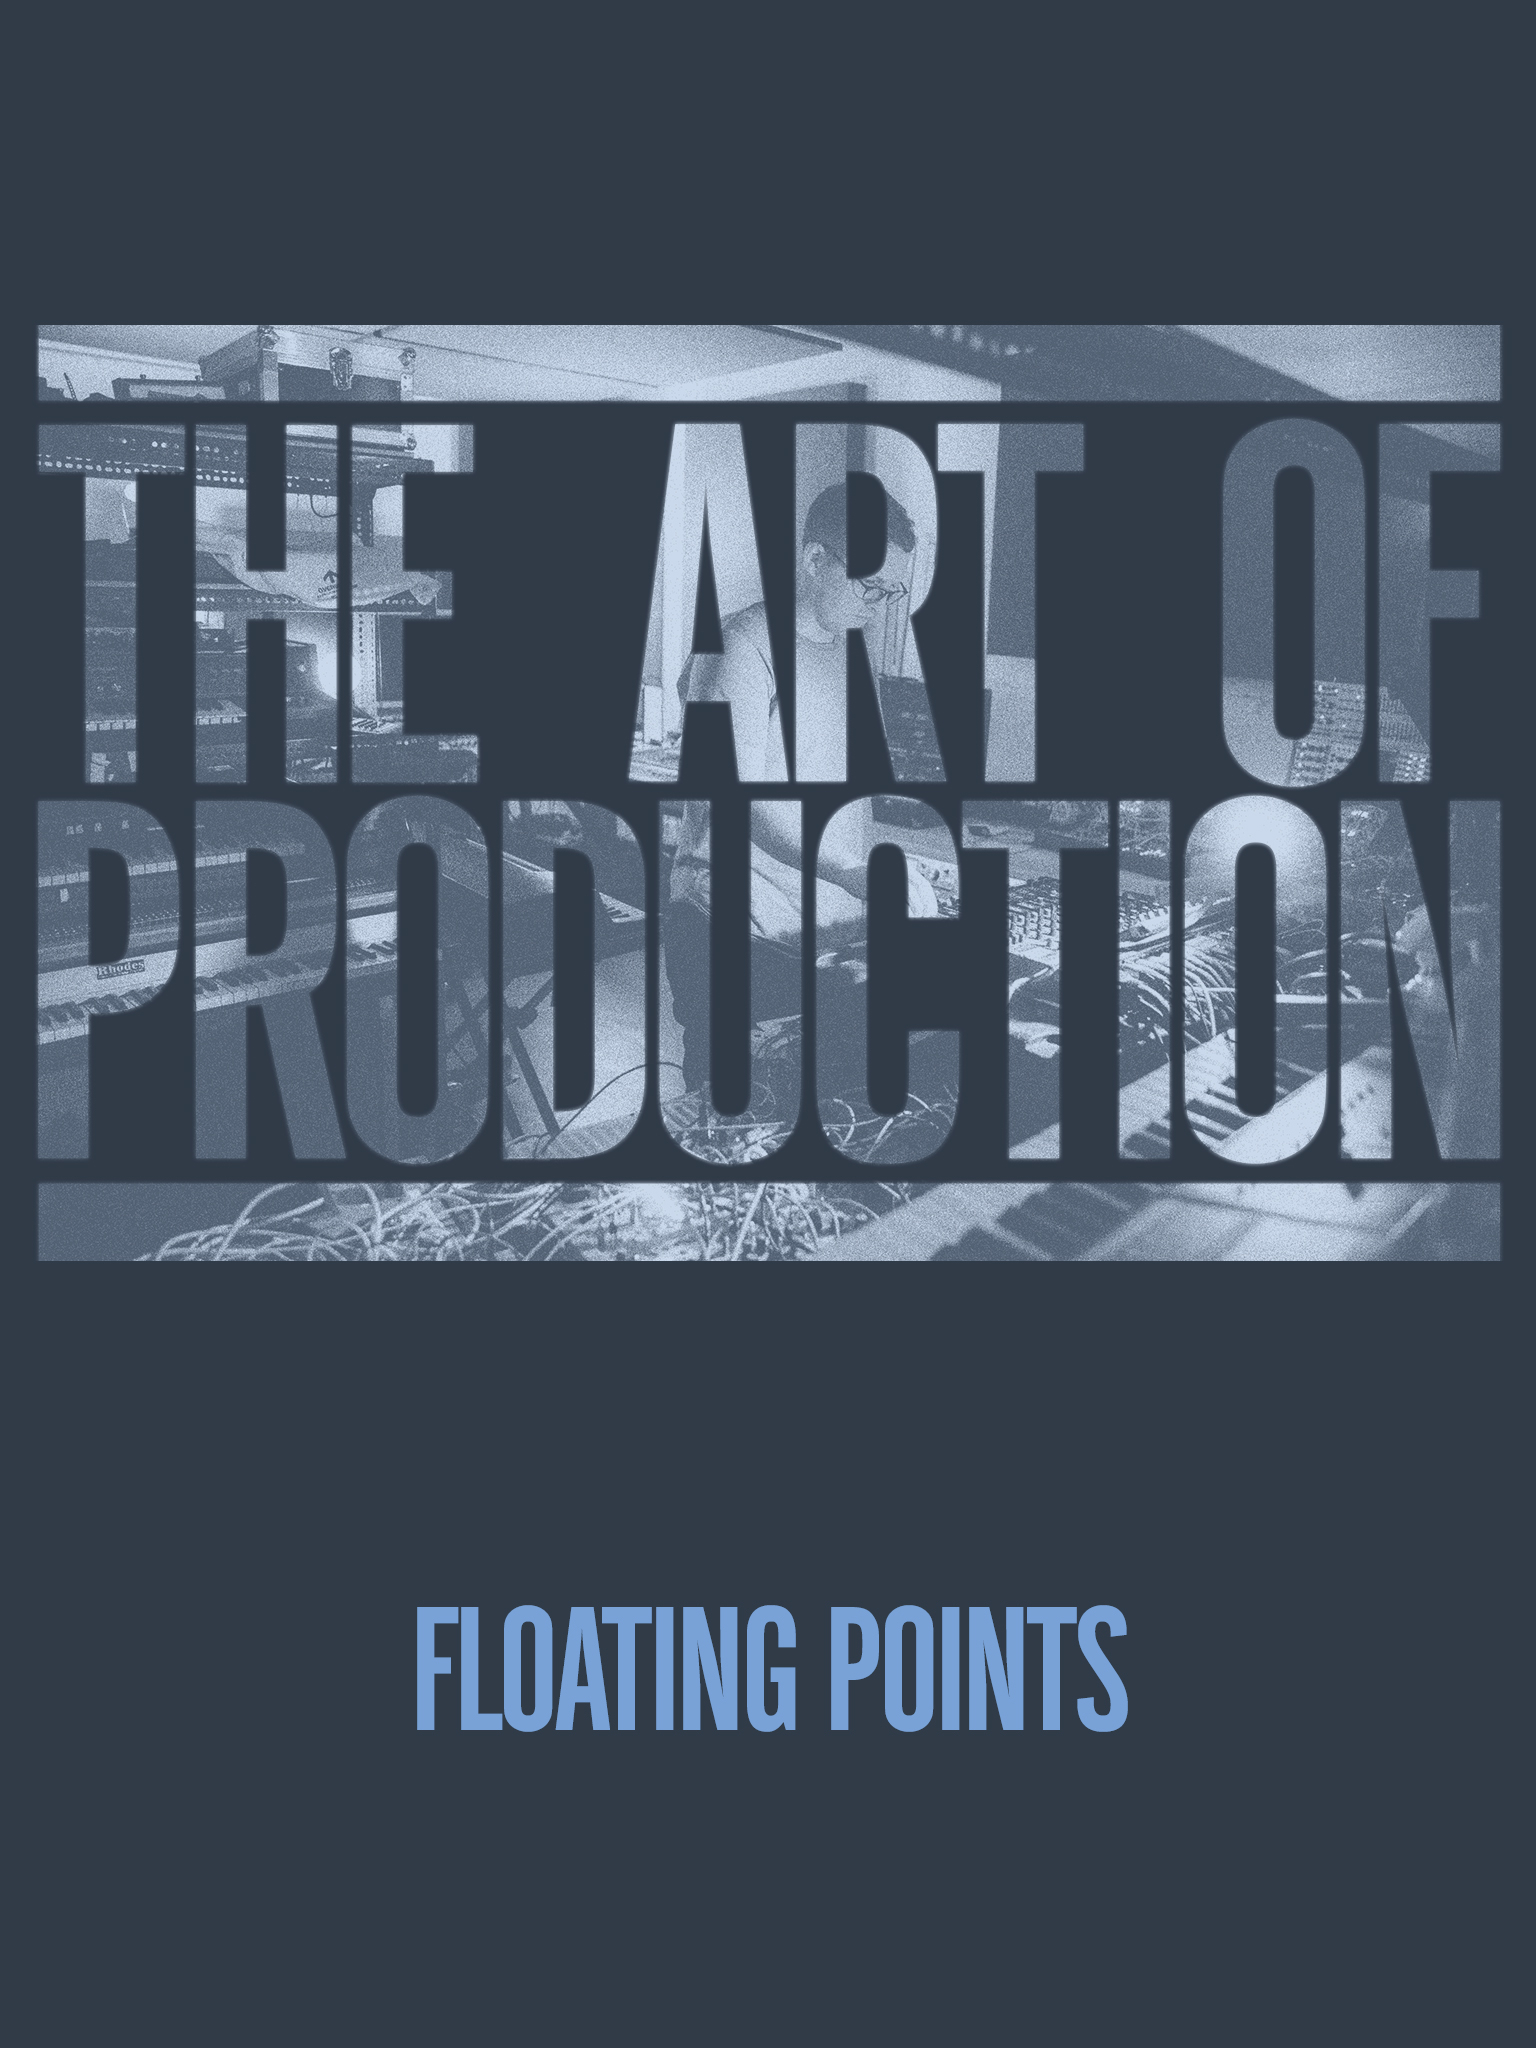 Ra The Art Of Production Floating Points